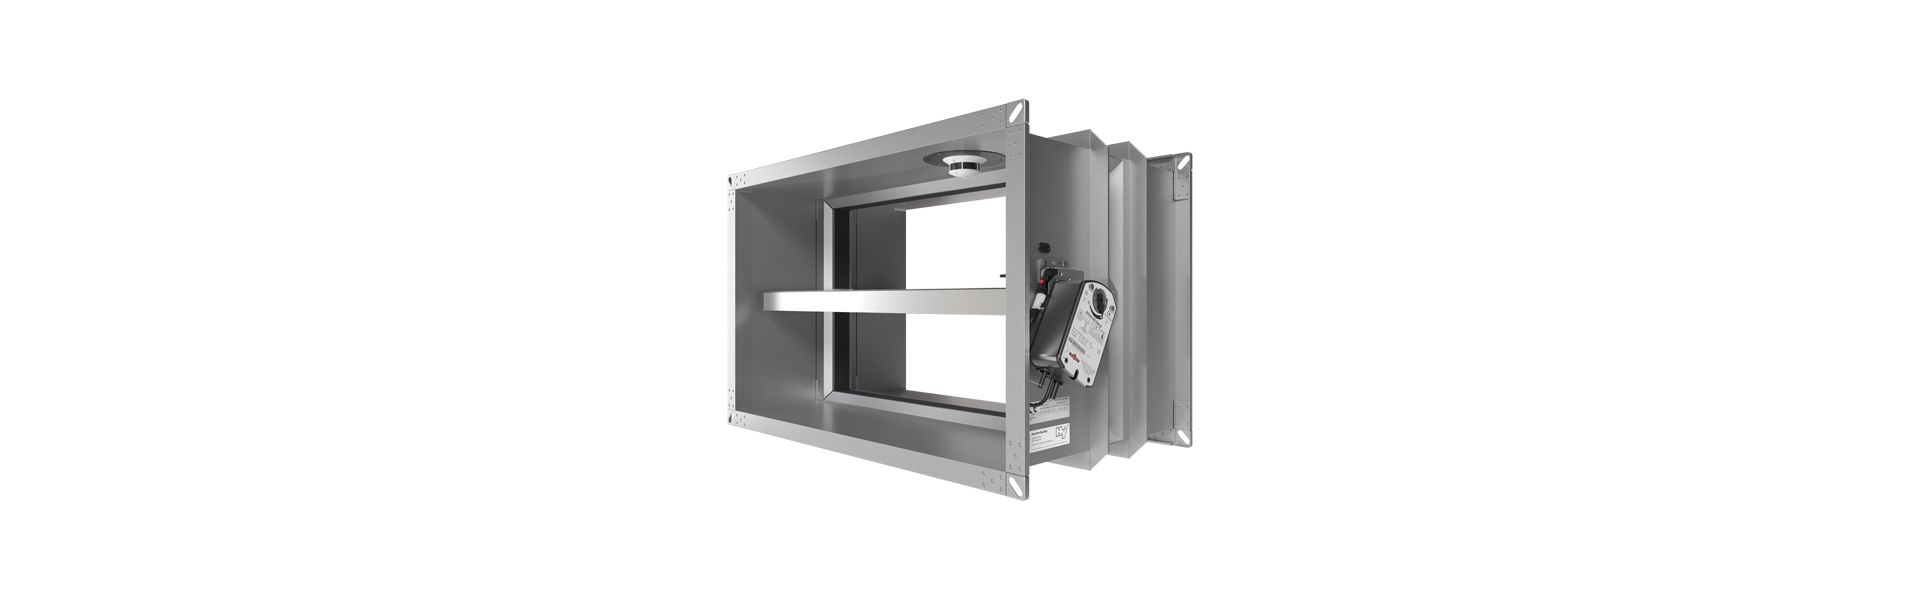 FK90 fire damper with OR32 smoke release device half right from the front